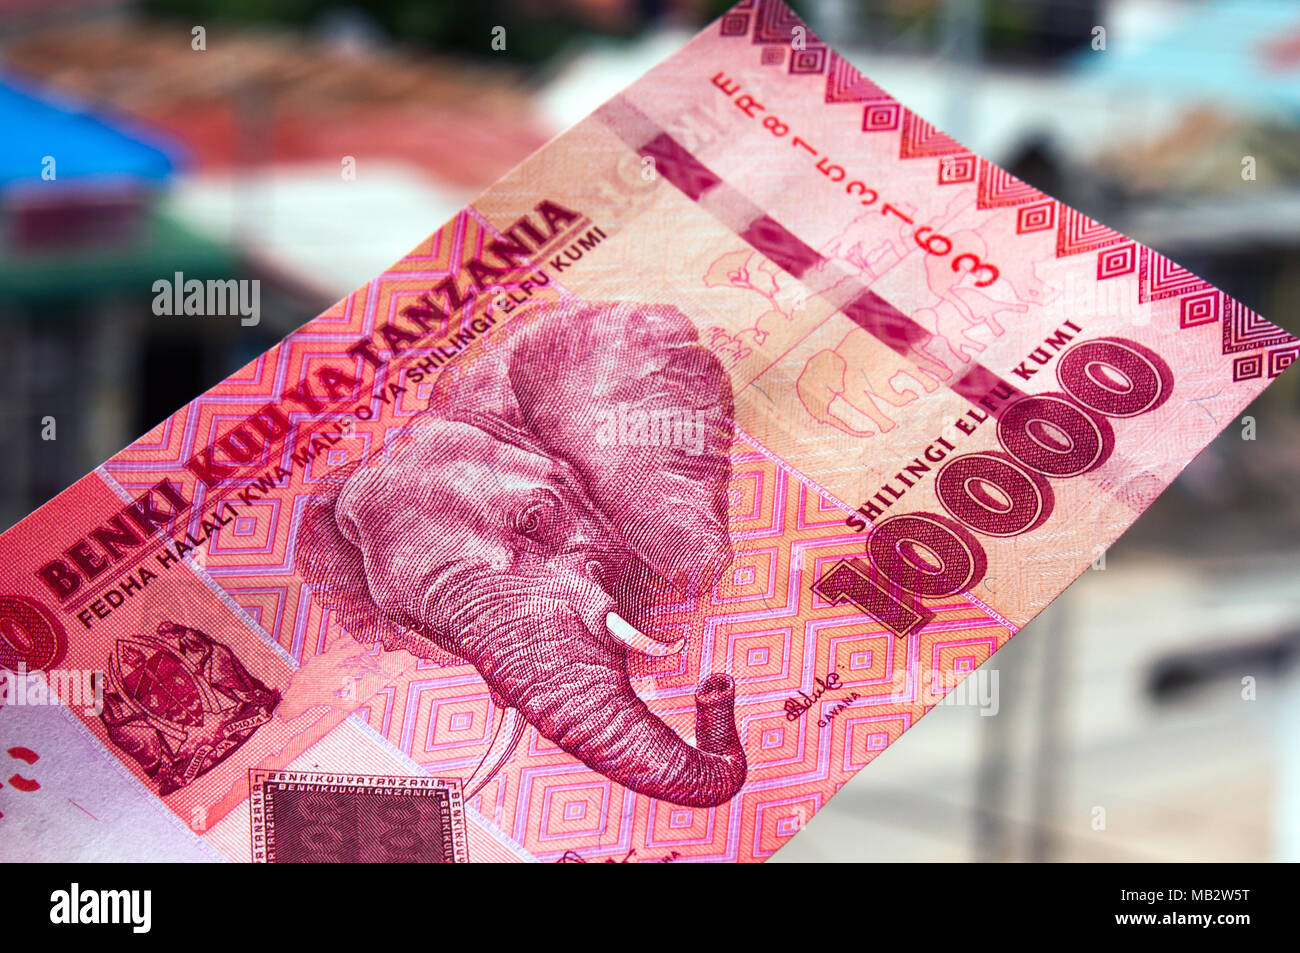 The Tanzanian 10,000 shilling banknote depicting elephant in the wild photographed on location in Dar es Salaam Stock Photo